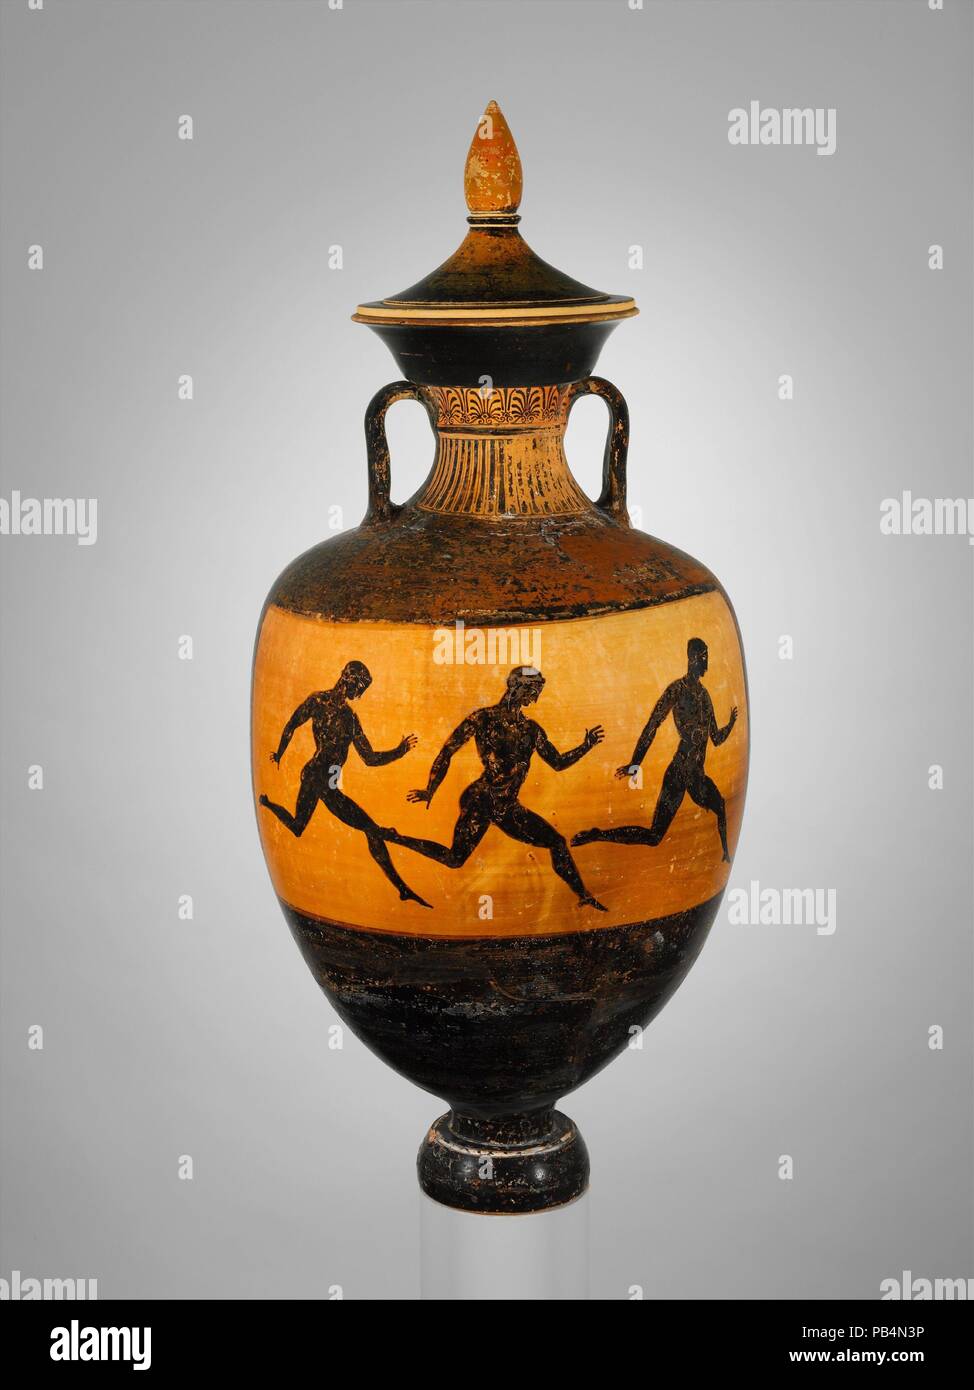 Terracotta Panathenaic prize amphora. Culture: Greek, Attic. Dimensions: H. with lid  34 in. (86.3 cm); H. without lid  27 3/4 in. (70.5 cm); diameter of mouth  9 in. (22.9 cm); diameter of foot  5 1/2 in. (14 cm). Date: ca. 366/365 B.C..  Obverse, Athena  Reverse, footrace  Official prize amphorae in the Panathenaic games are always identified by an inscription. Beginning in the early fourth century B.C., an additional inscription gives the name of the archon, the civil magistrate during whose tenure the oil for the succeeding festival was harvested.  Because other sources provide the dates o Stock Photo